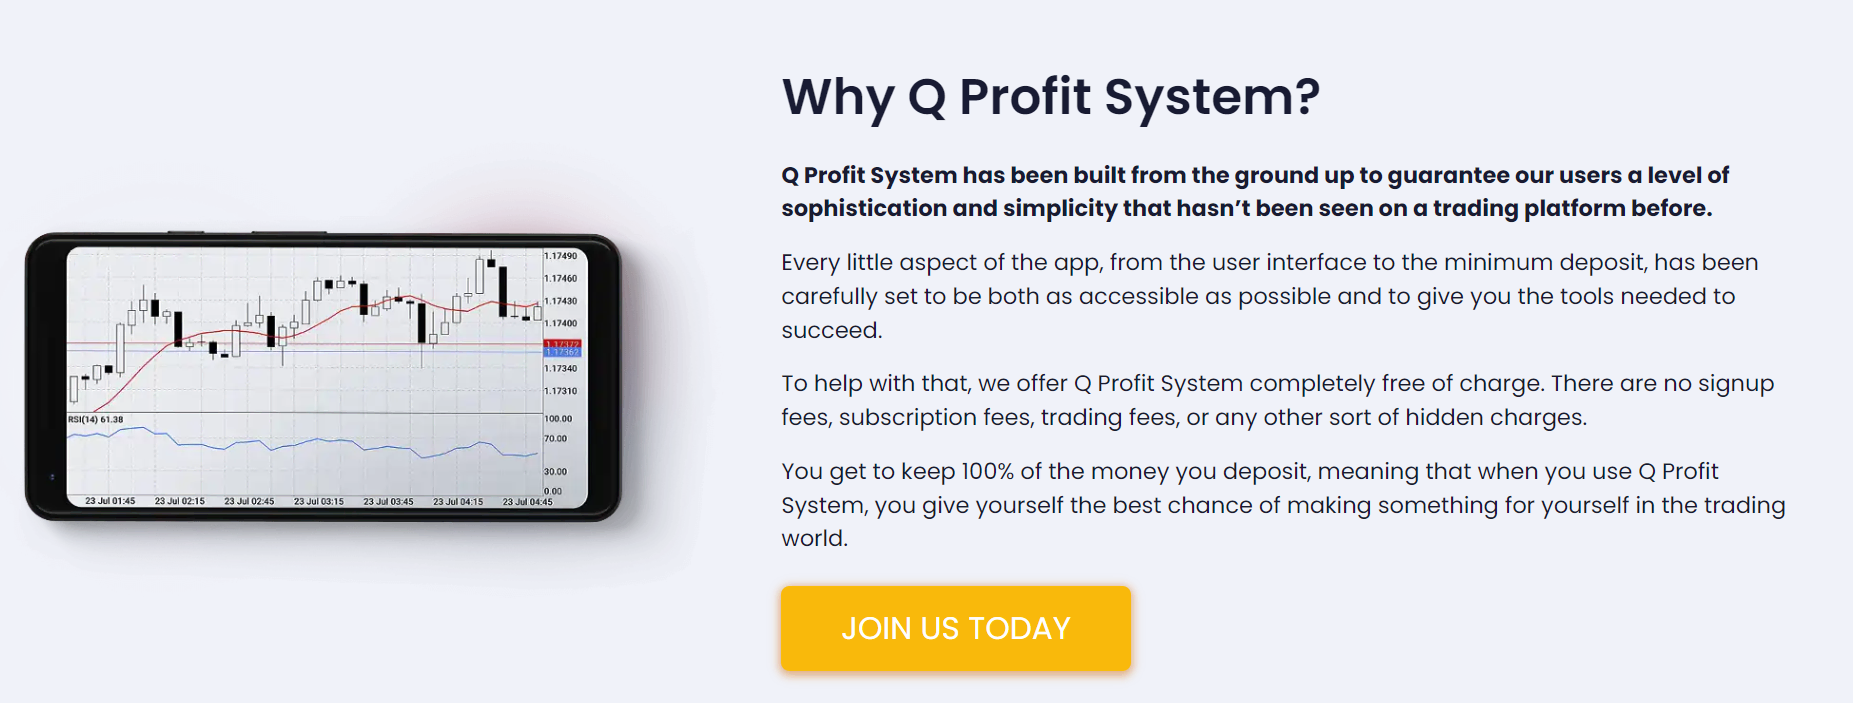 Reasons to choose Q Profit System presented on the official website